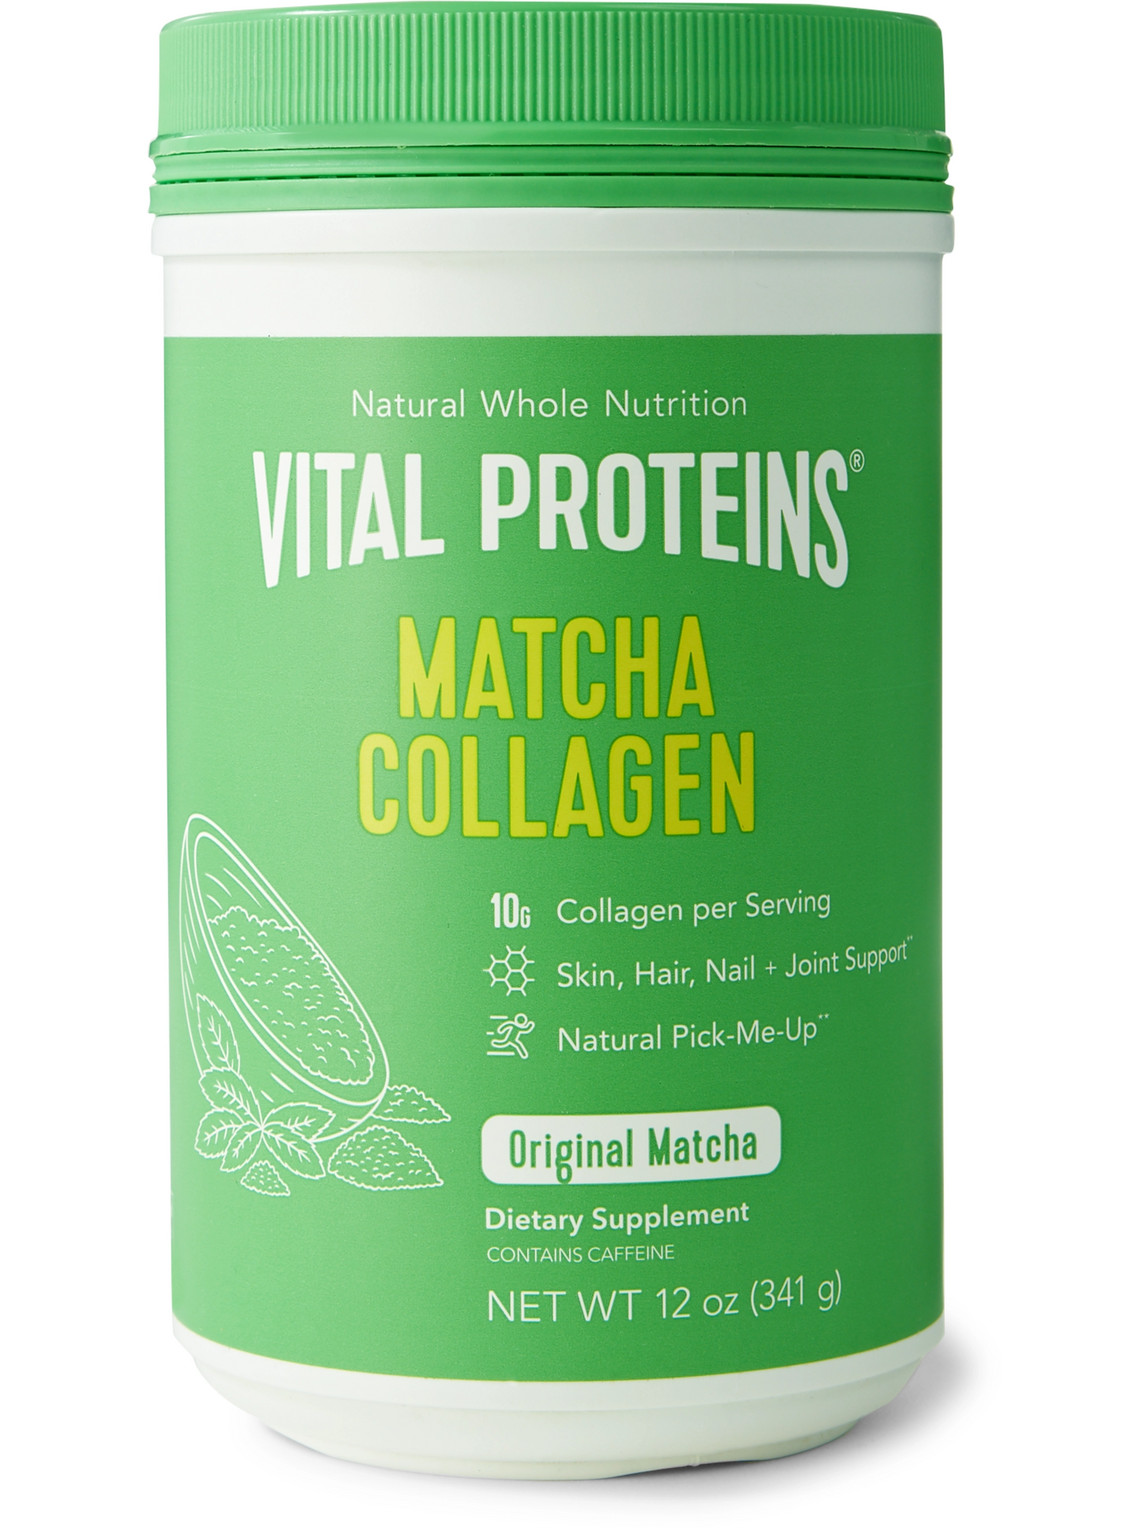 Vital Proteins Matcha Collagen, 341g In Colorless